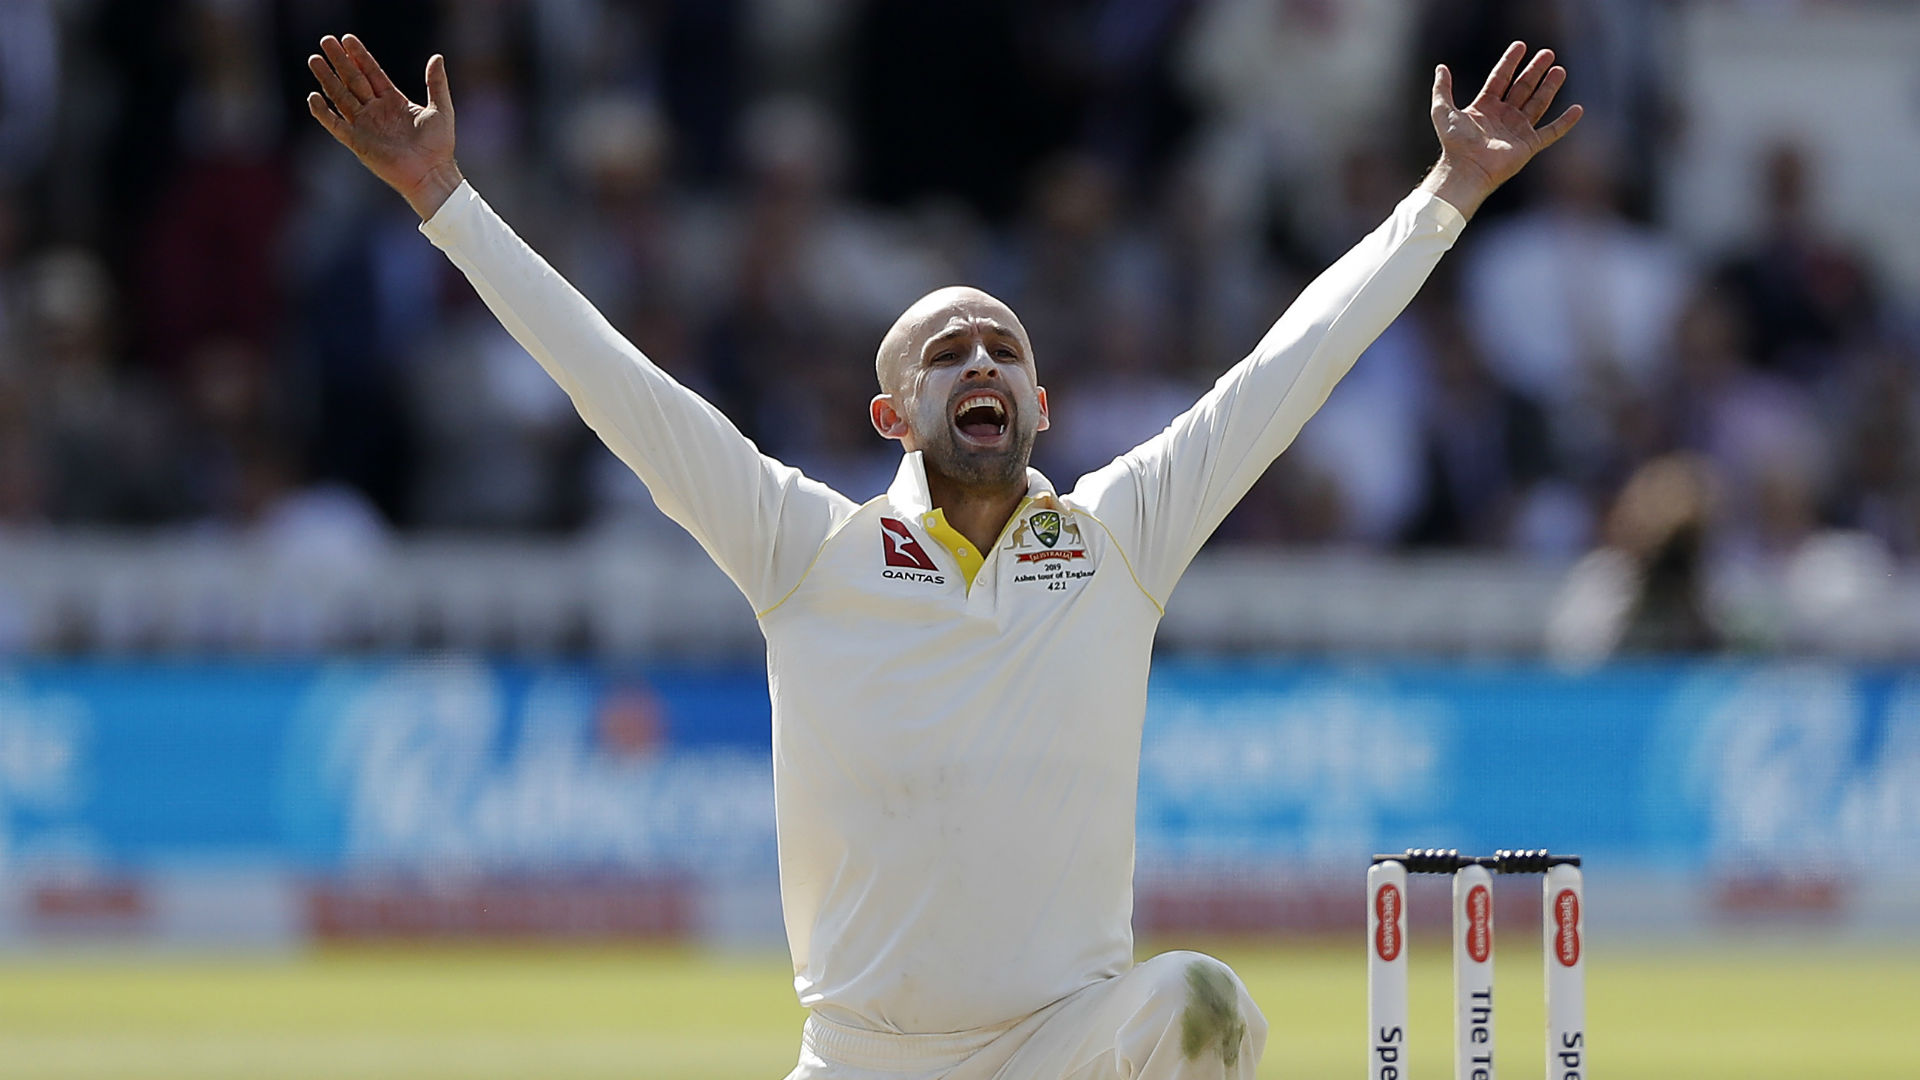 Nathan Lyon lapped up England's torture at the hands of India spinners Ravichandran Ashwin and Axar Patal in Ahmedabad.